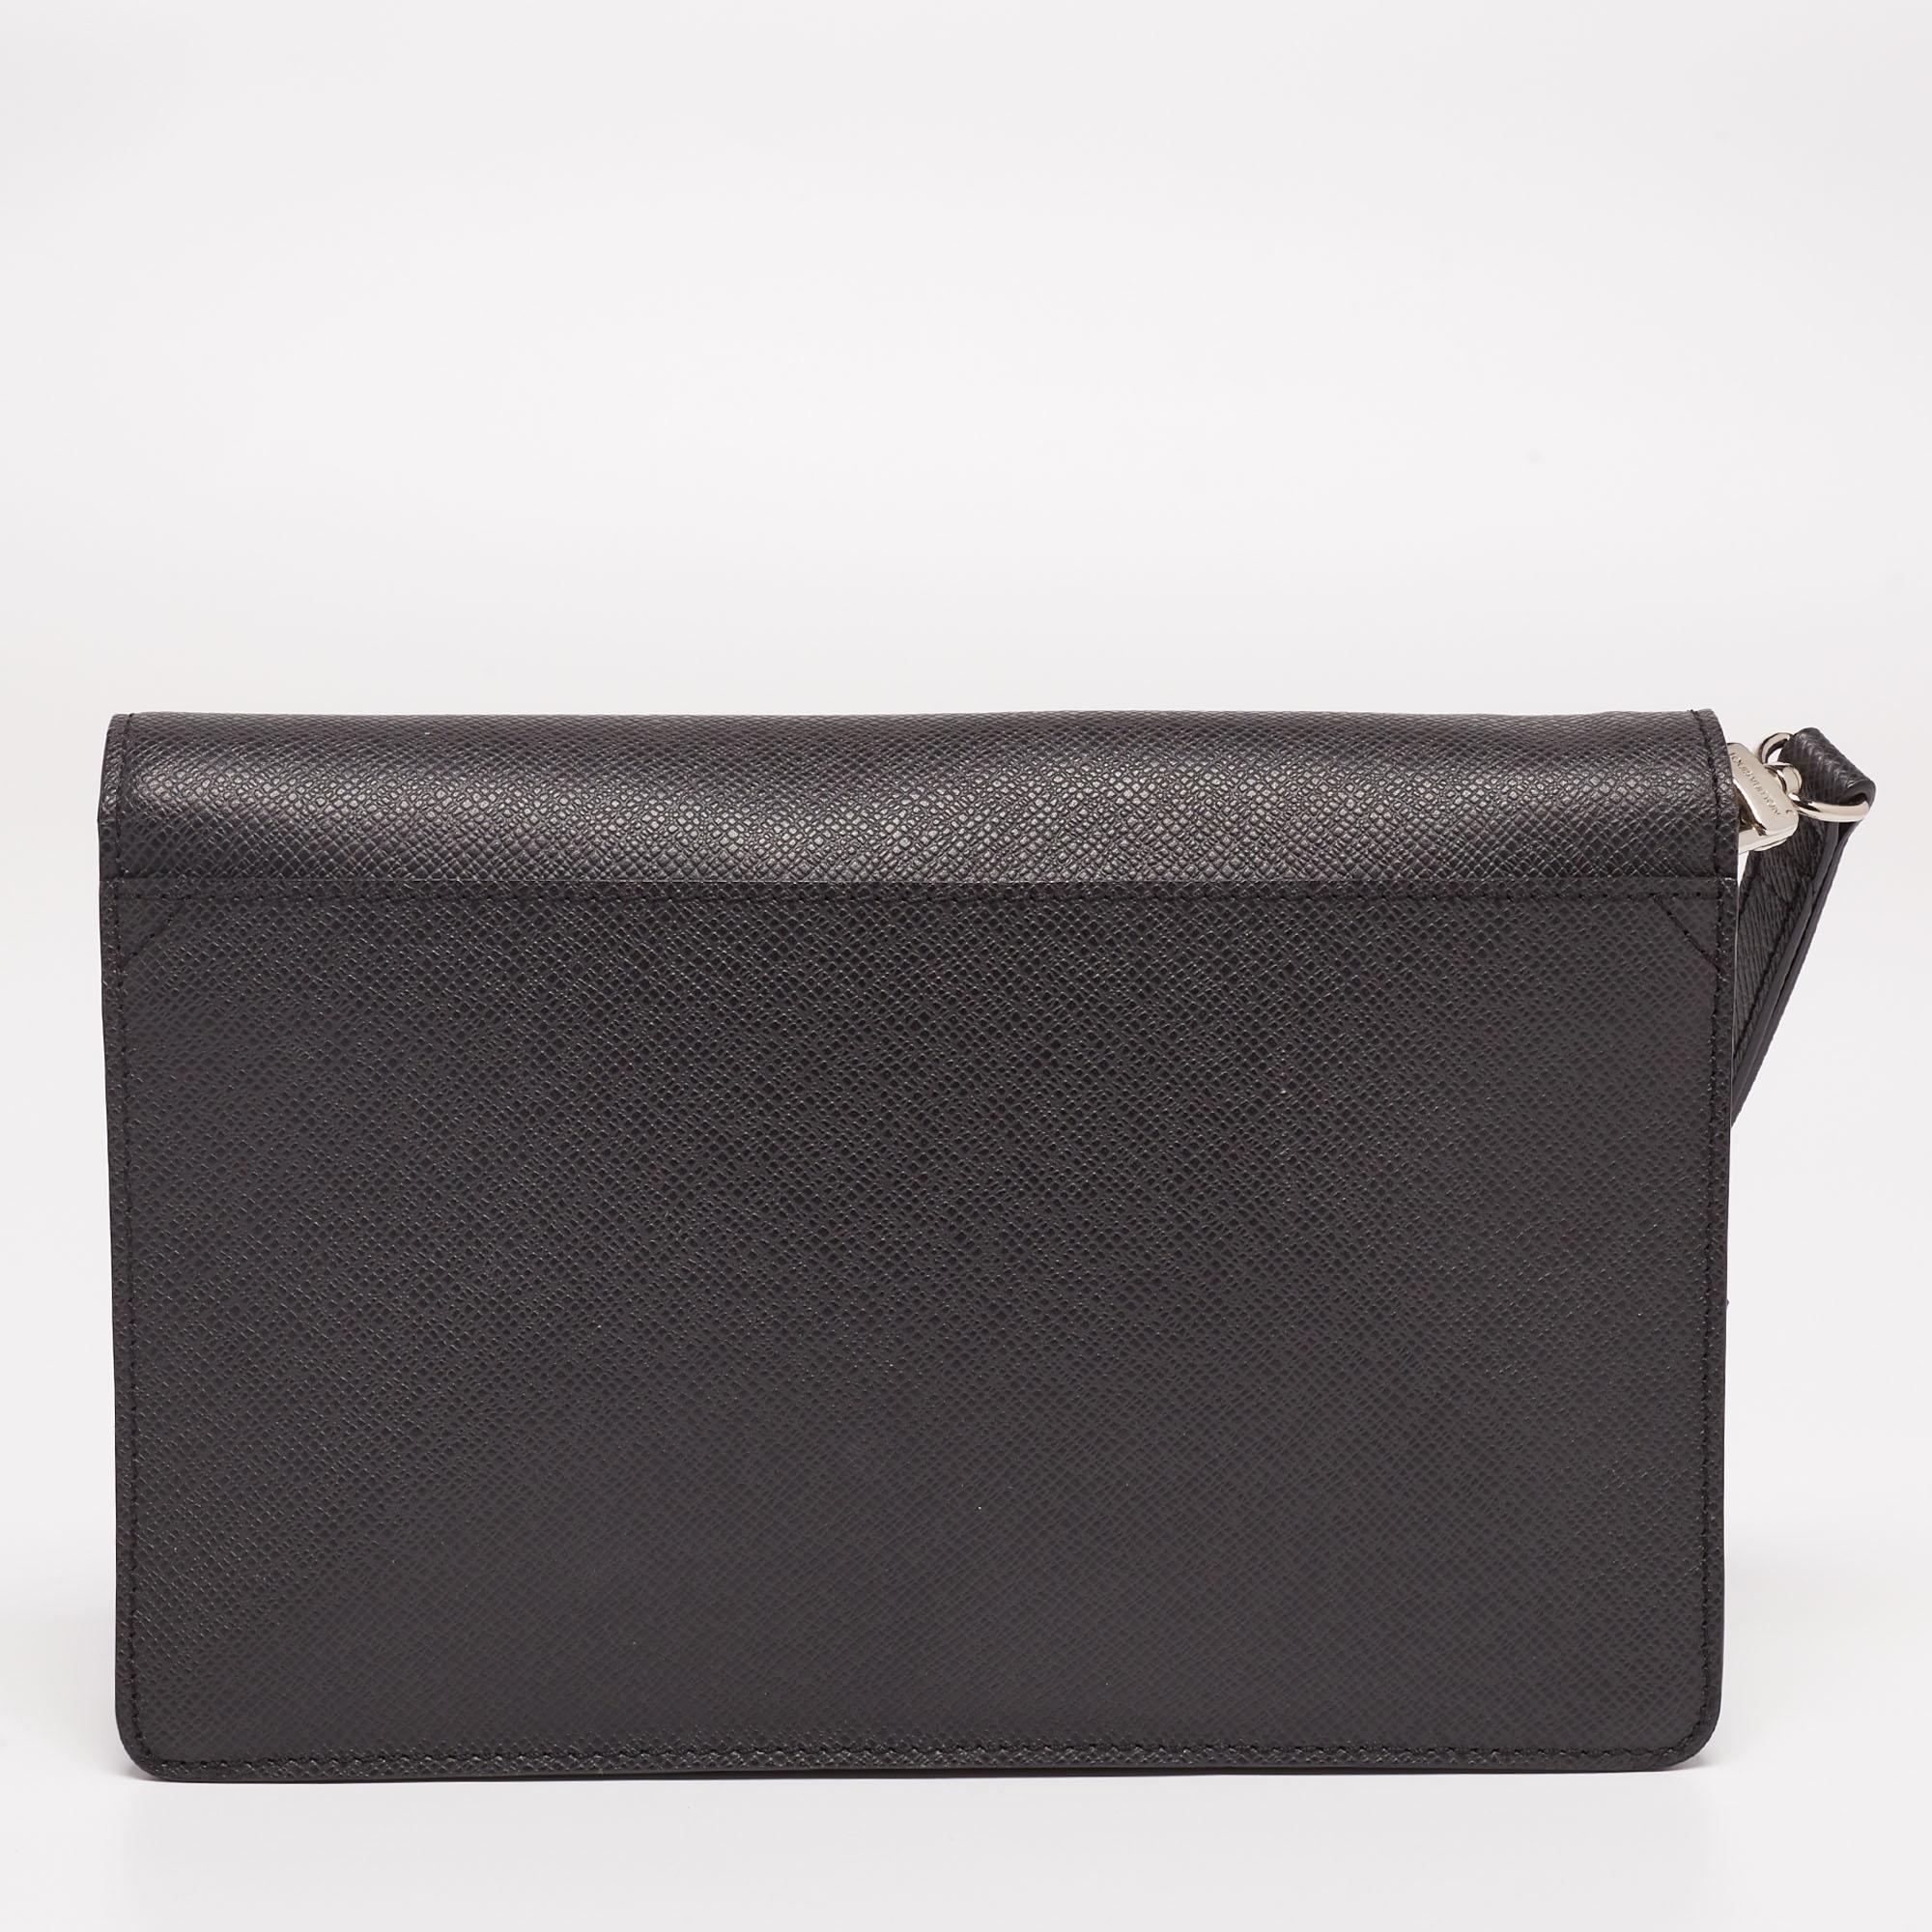 This gorgeous clutch by Louis Vuitton is a creation that is not only chic but also exceptionally well-made. It is a design that is simple and sophisticated. Meticulously crafted from leather, it flaunts a grey shade and a front flap that leads to a